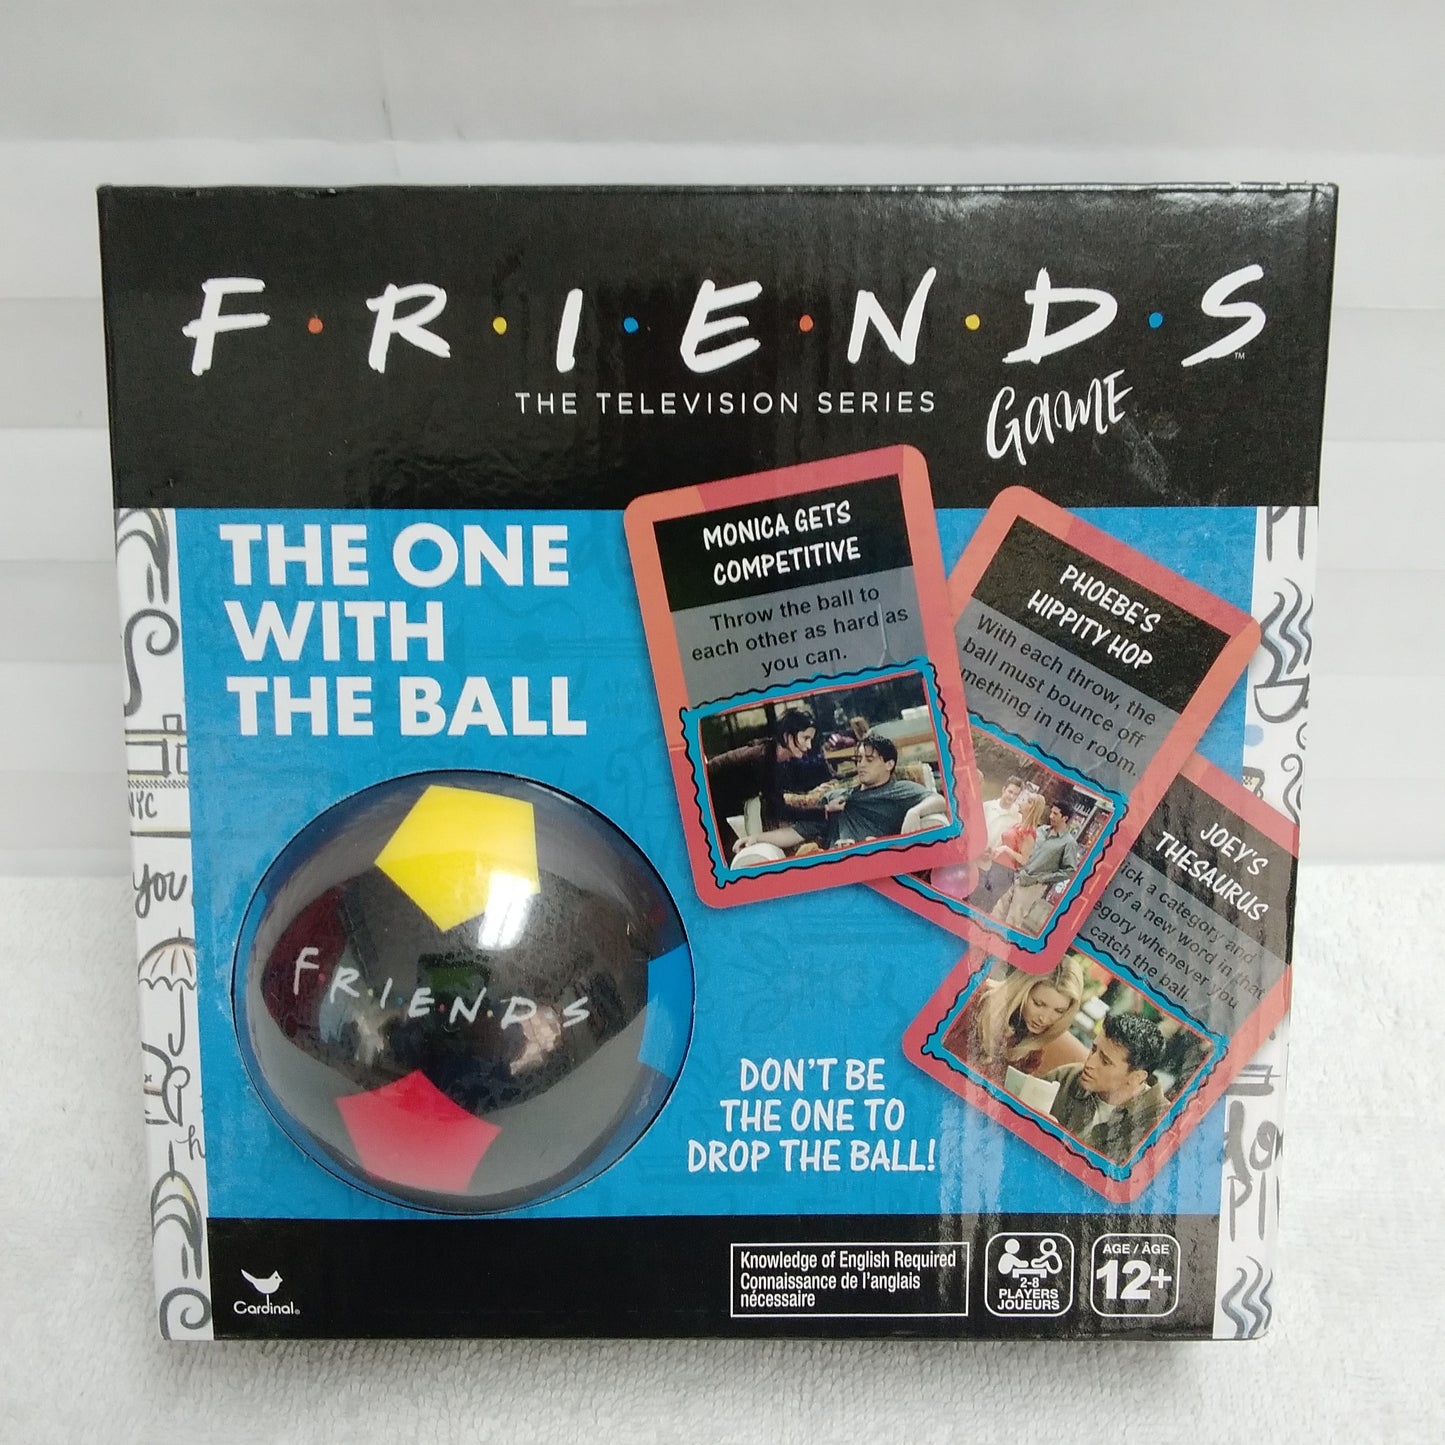 NIB - Friends "The One With The Ball" Party Game by Cardinal Games